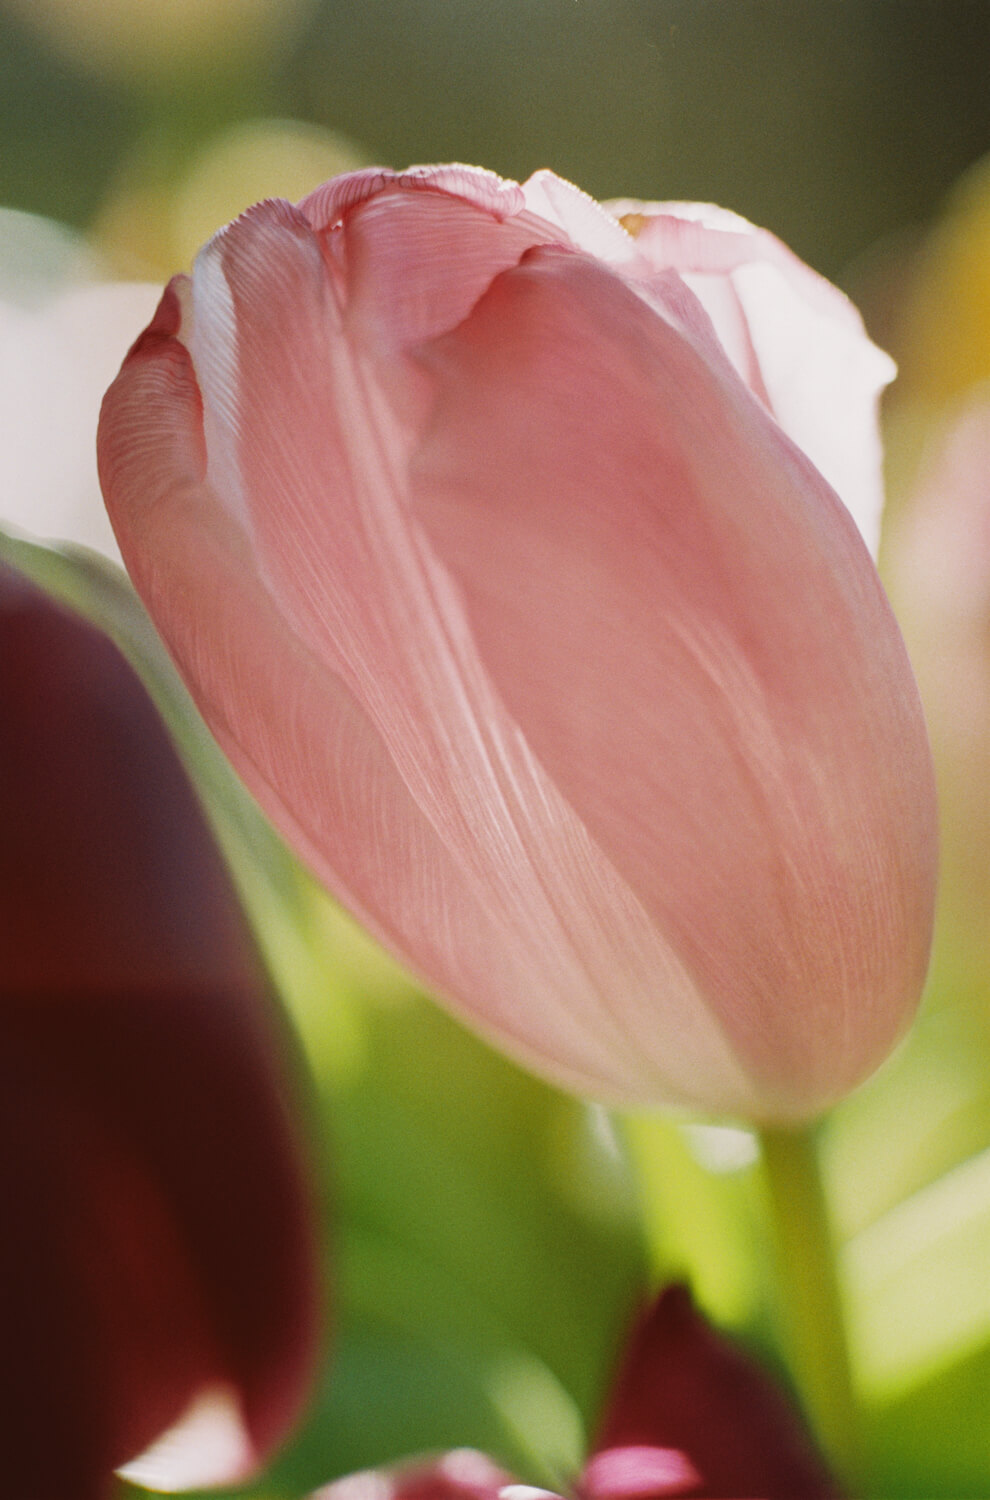 5 Frames of... Tulips on overexposed Fujicolor C200 (Leica R3, Macro-Elmarit 60mm f/2.8) - by Charles Mutter